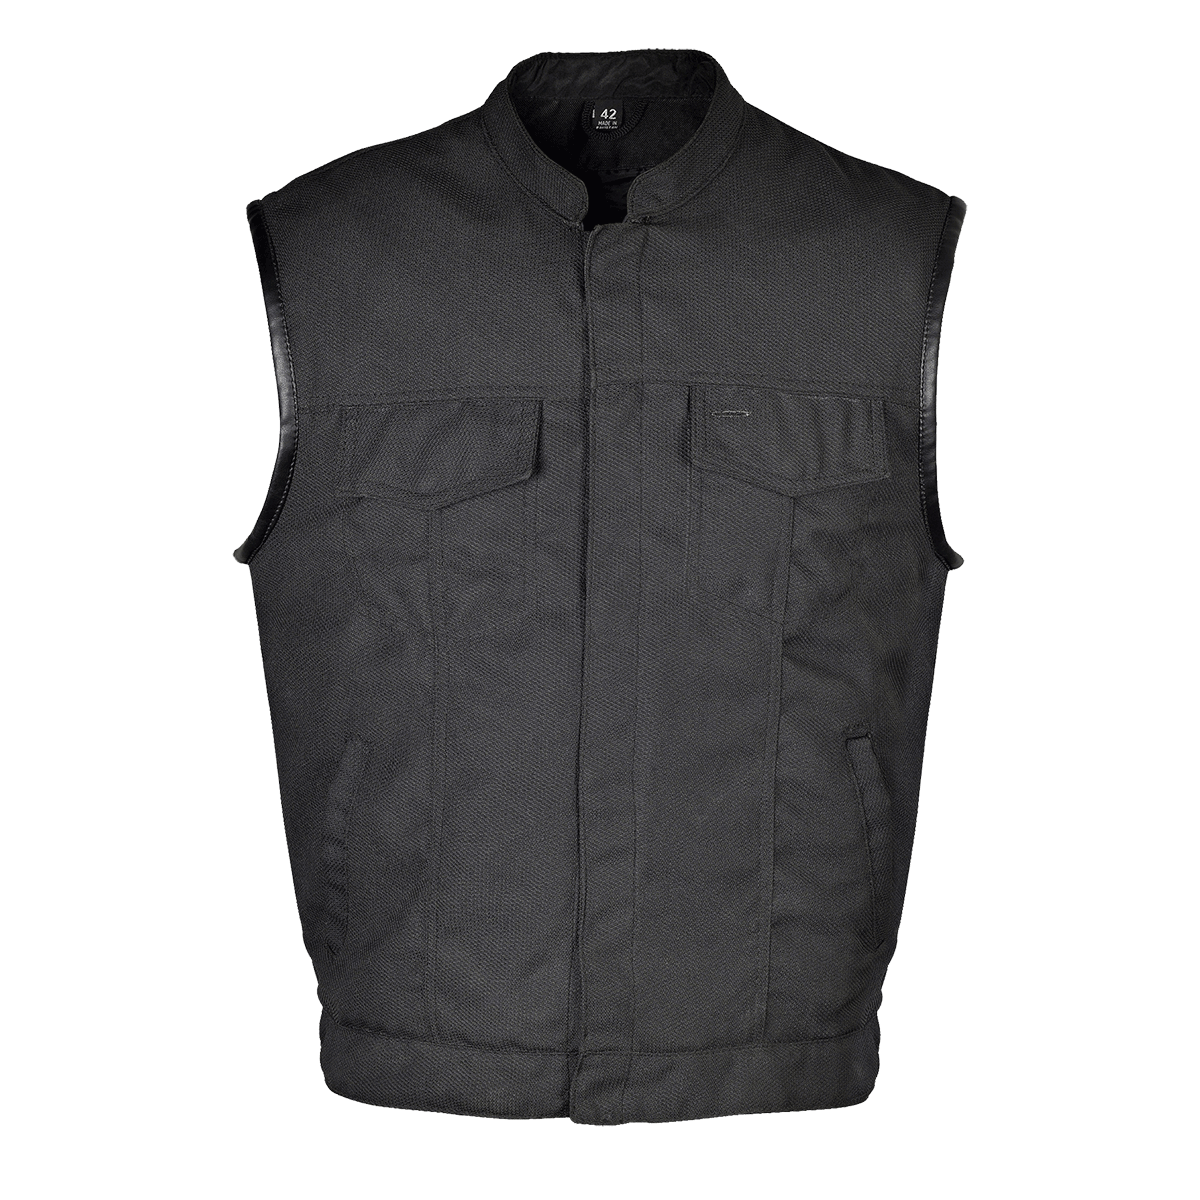 Vance Leather Heavy Duty Textile Club Vest with Snaps And Zipper Closure